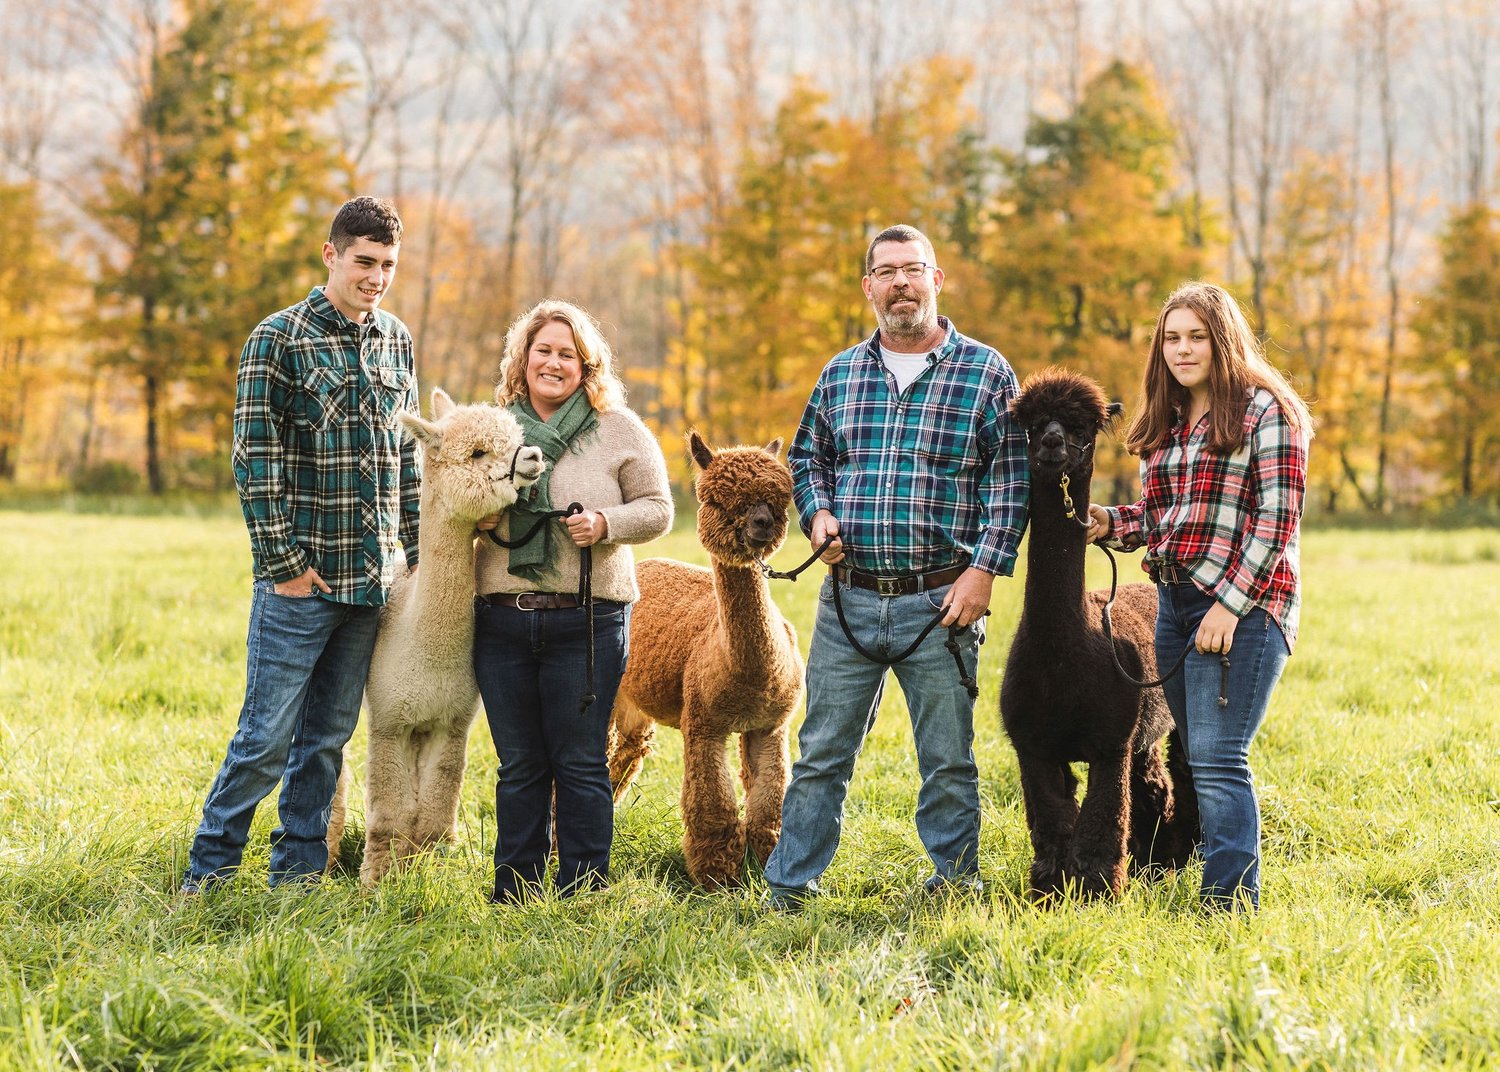 Buck Brook Alpacas from left to right: James, Kara, Justin and Ryann McElroy.